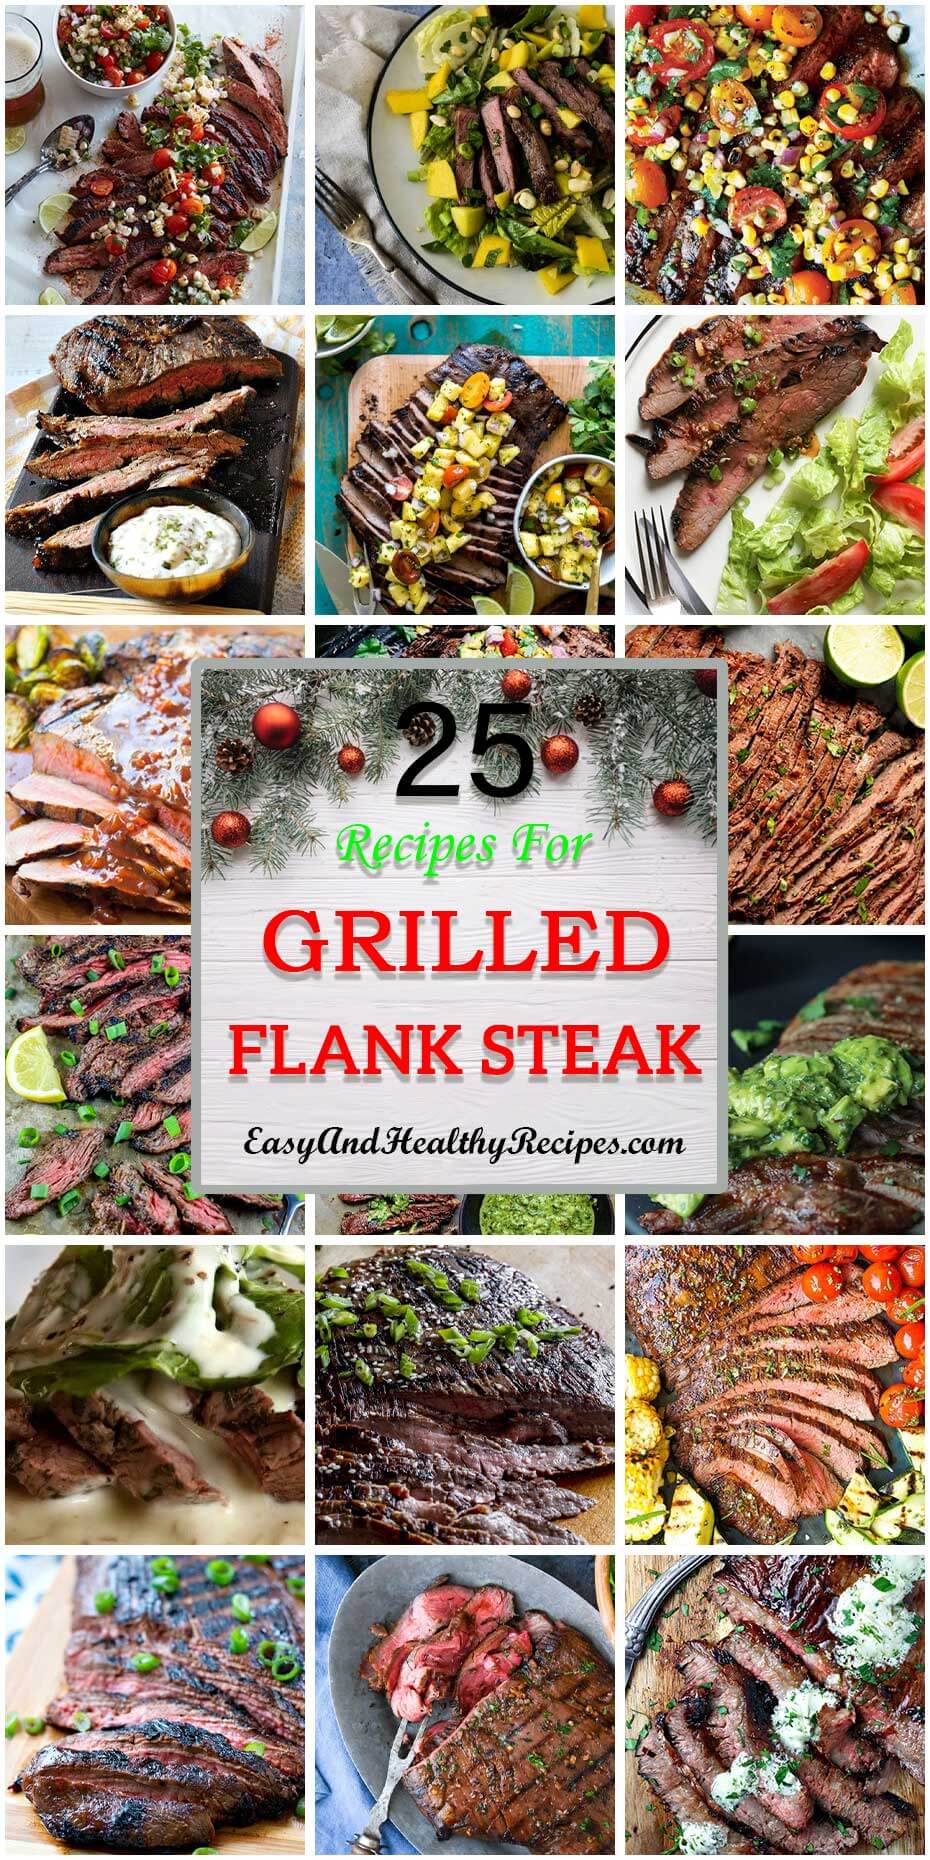 25 “Irresistible” Recipes For Grilled Flank Steak